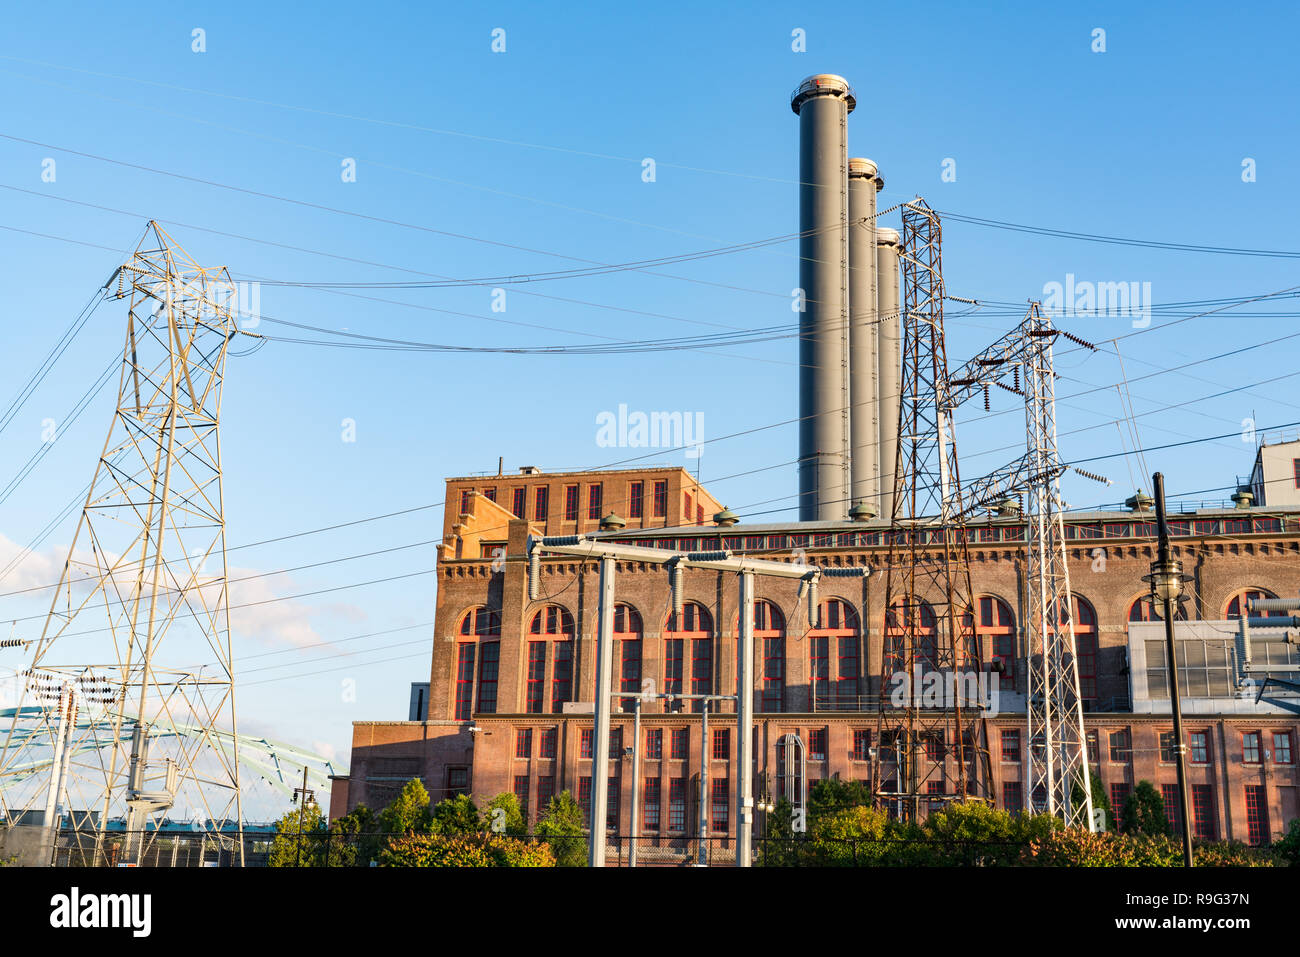 Electrical power plant with high voltage power lines Stock Photo